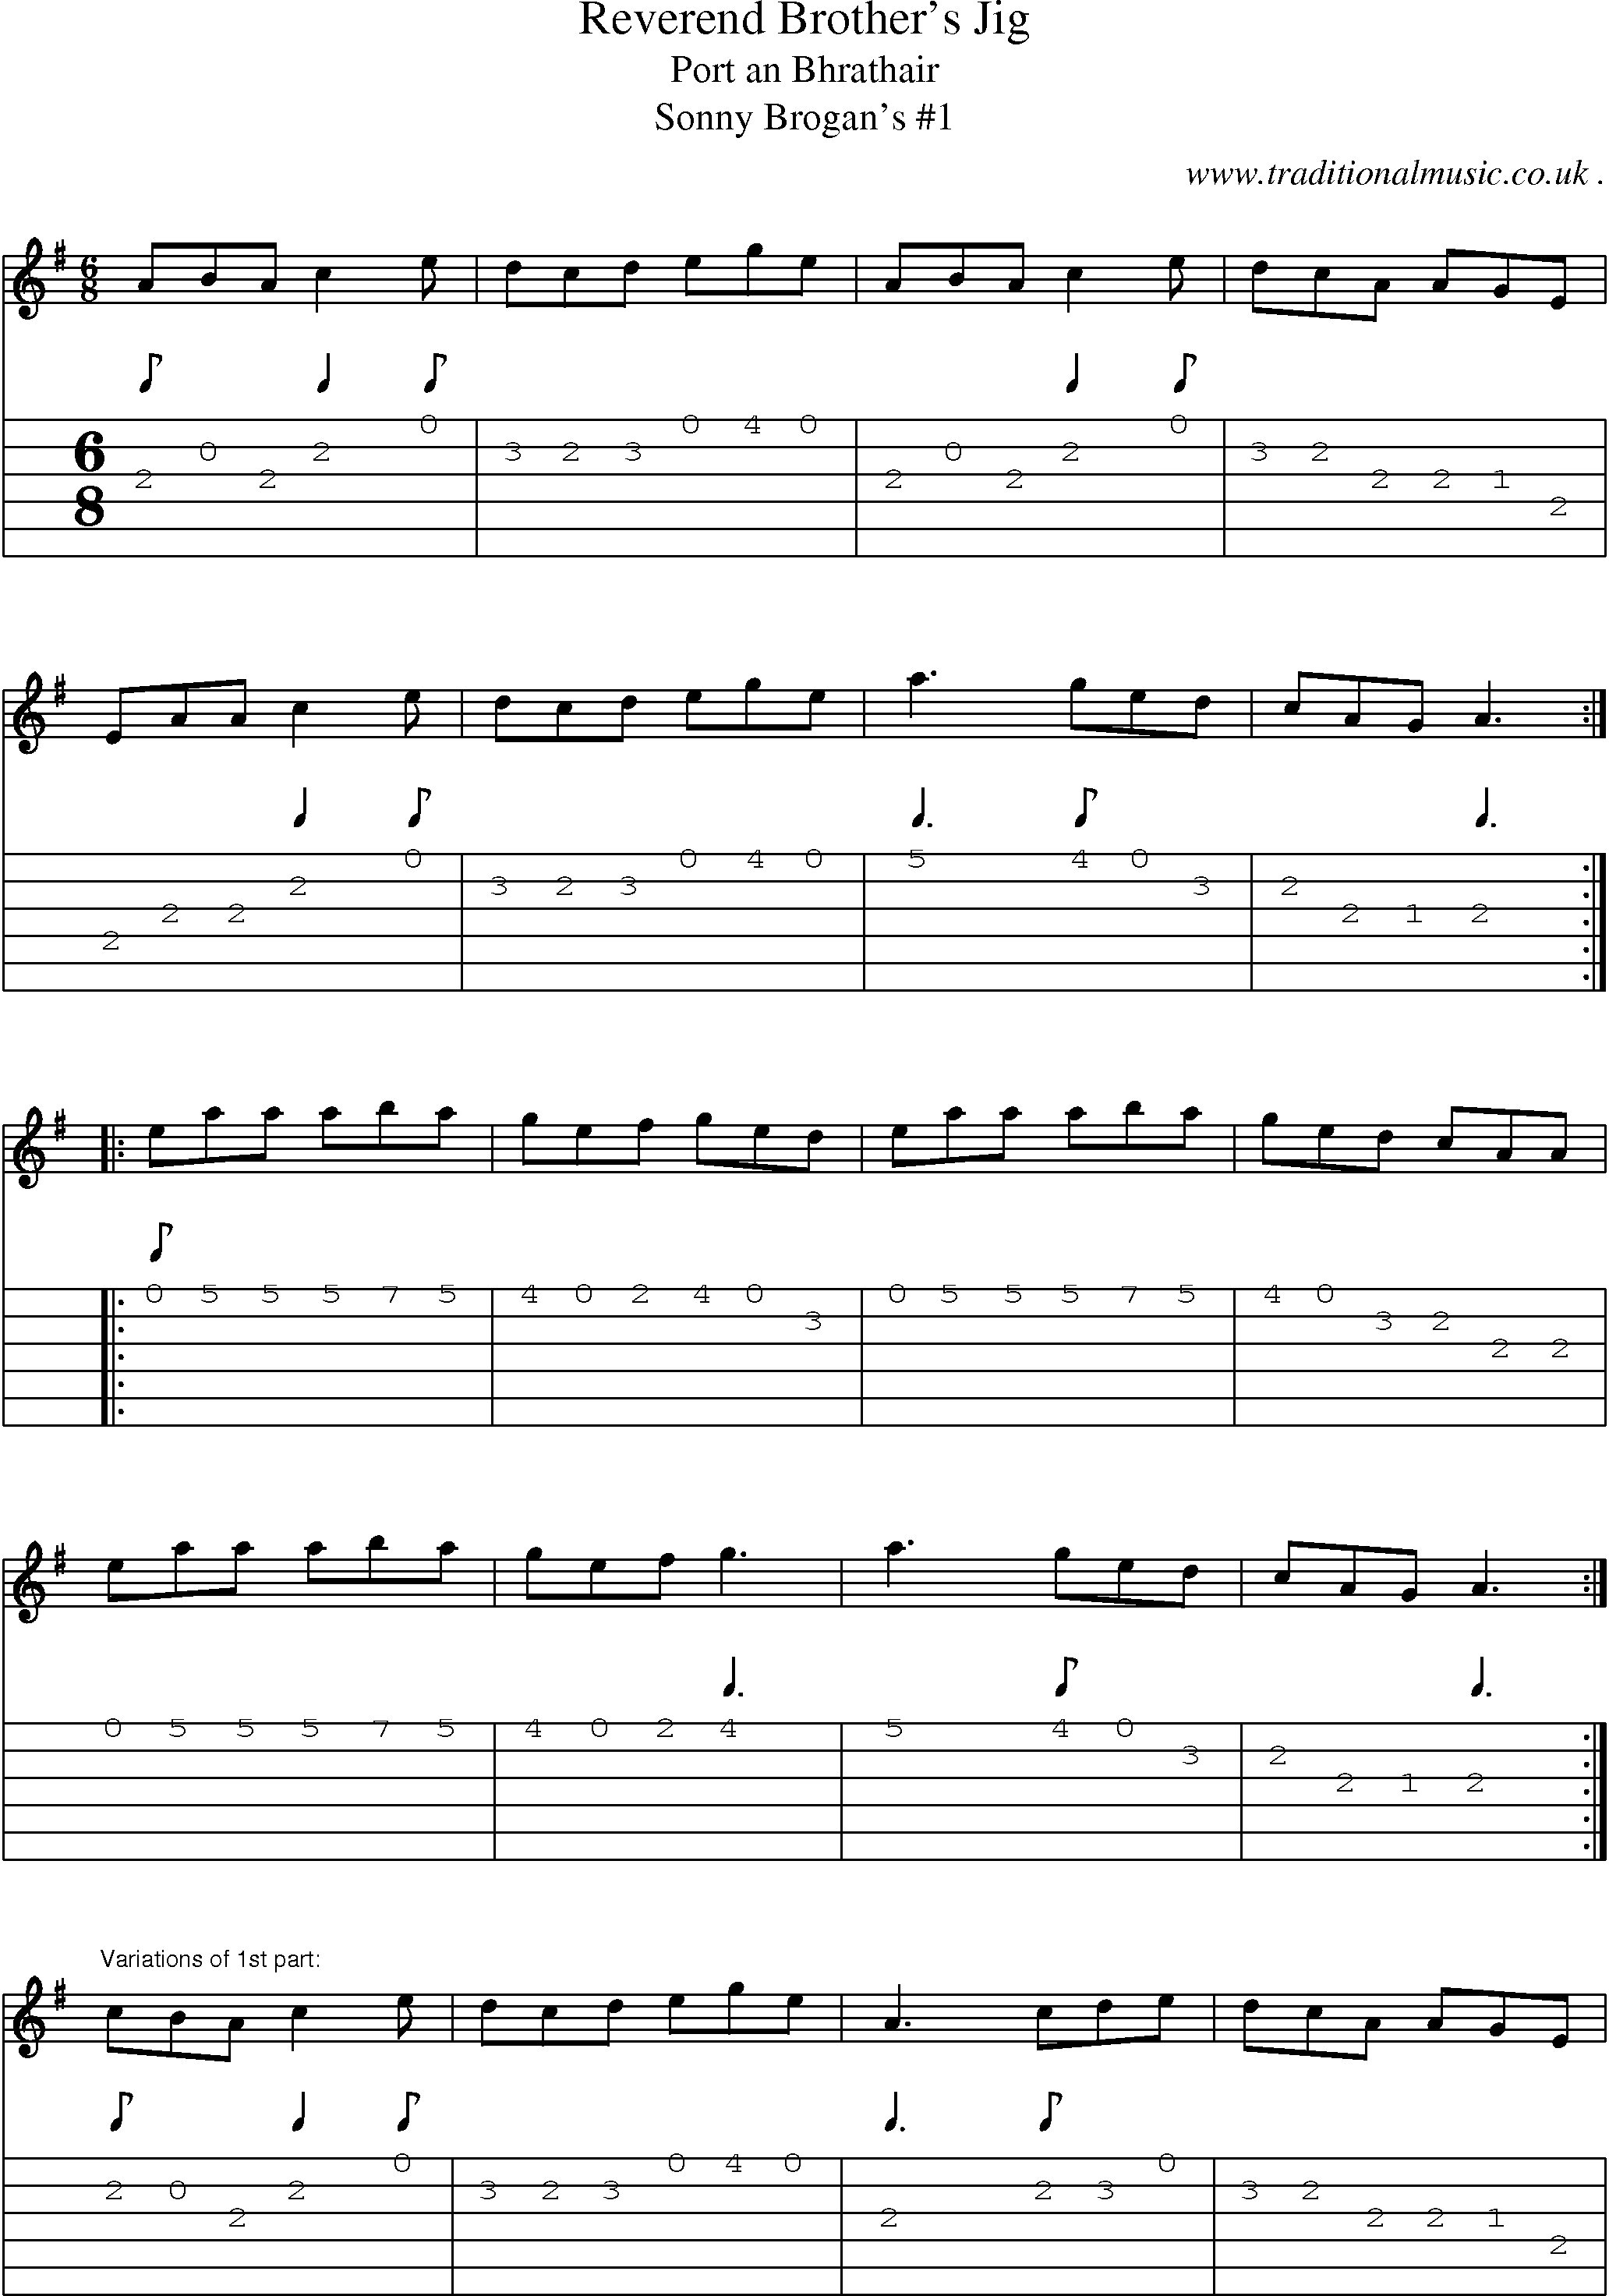 Sheet-Music and Guitar Tabs for Reverend Brothers Jig